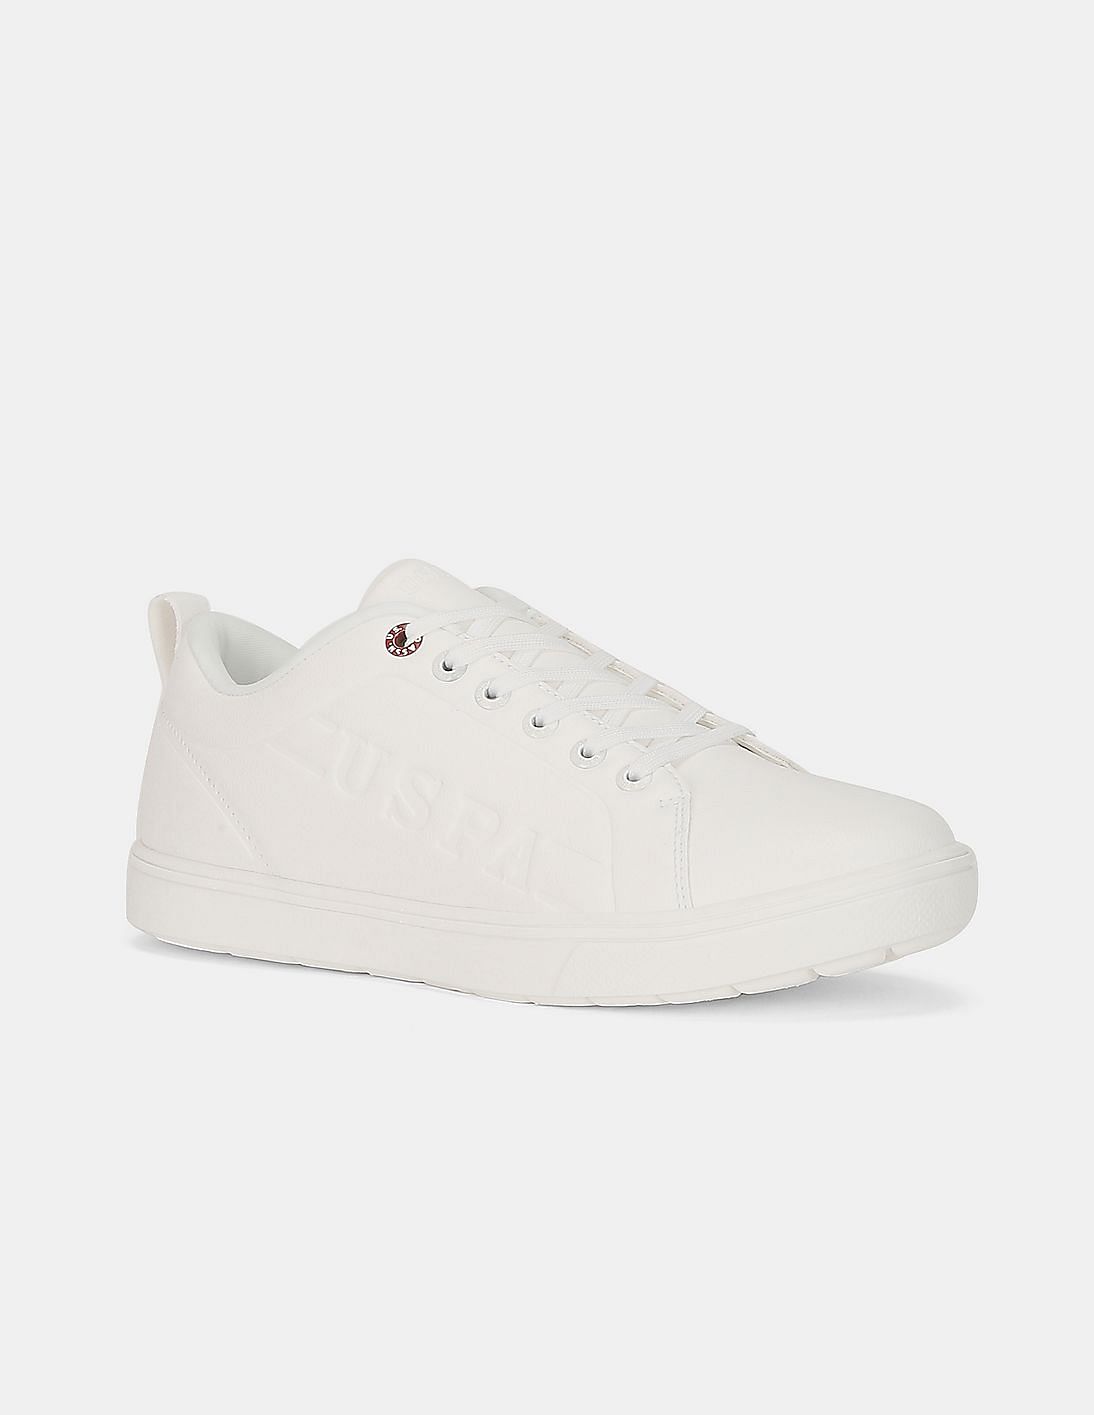 Buy U.S. Polo Assn. Cushioned Non-Skid Megan Sneakers - NNNOW.com